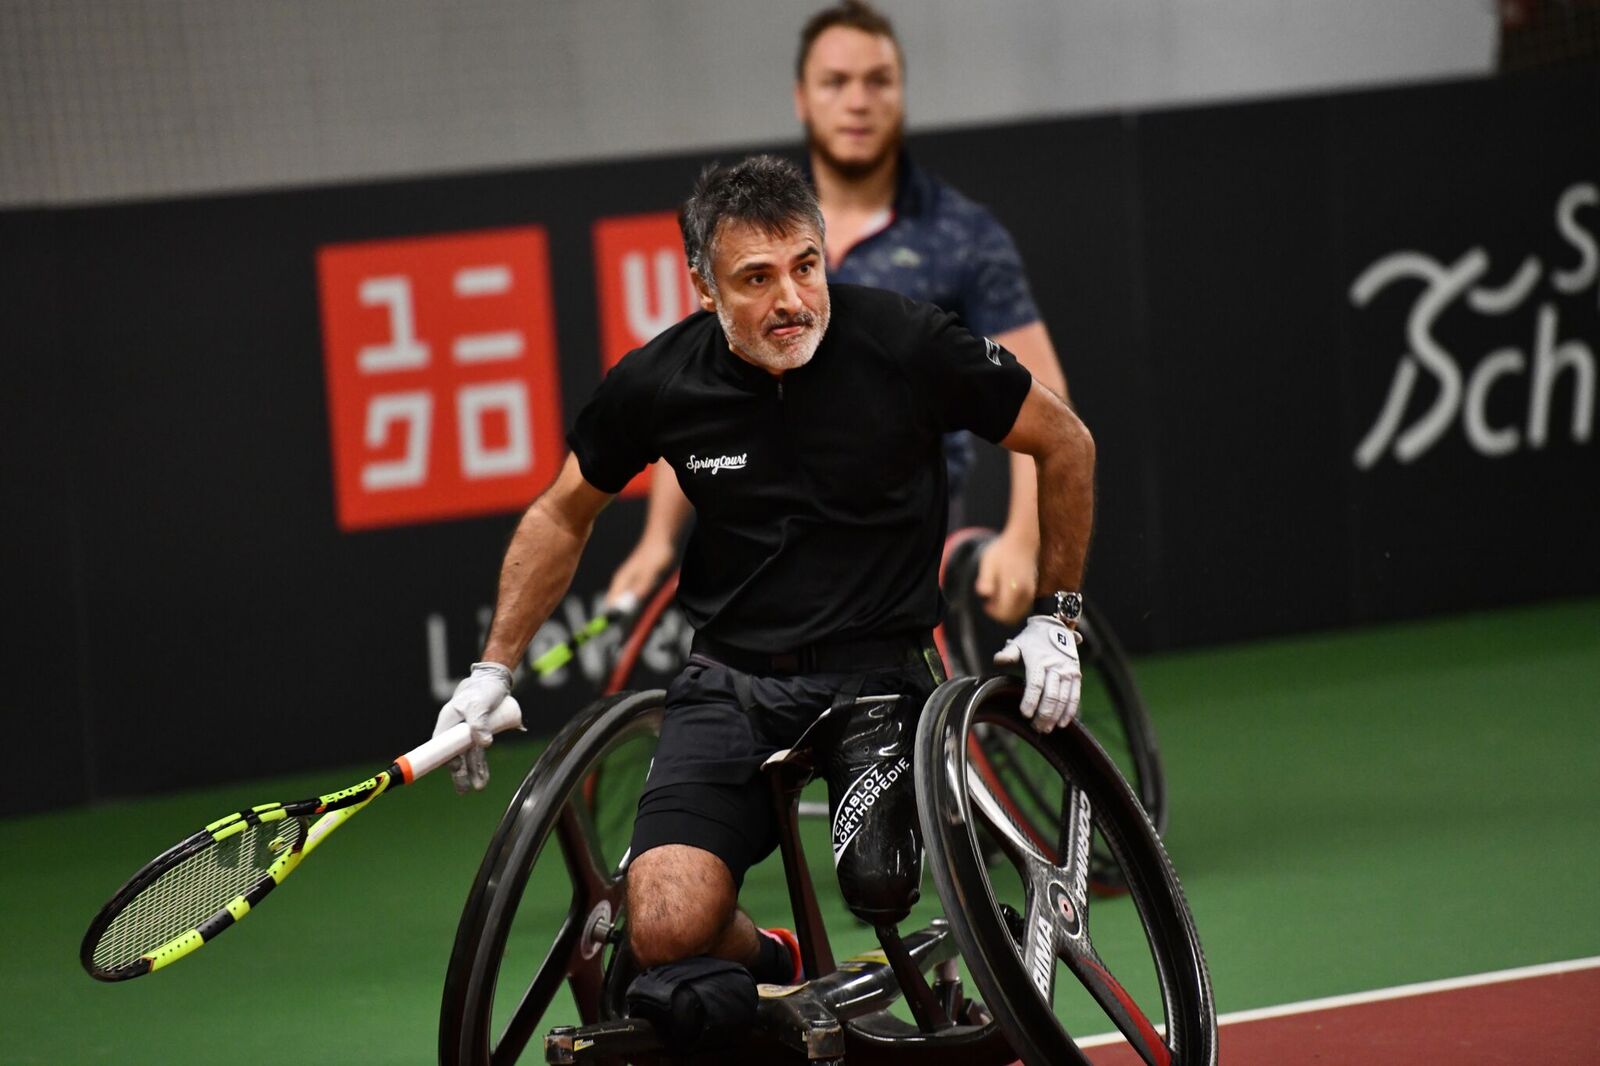 male wheelchair tennis players Stephane Houdet and Nicolas Peifer in action on court